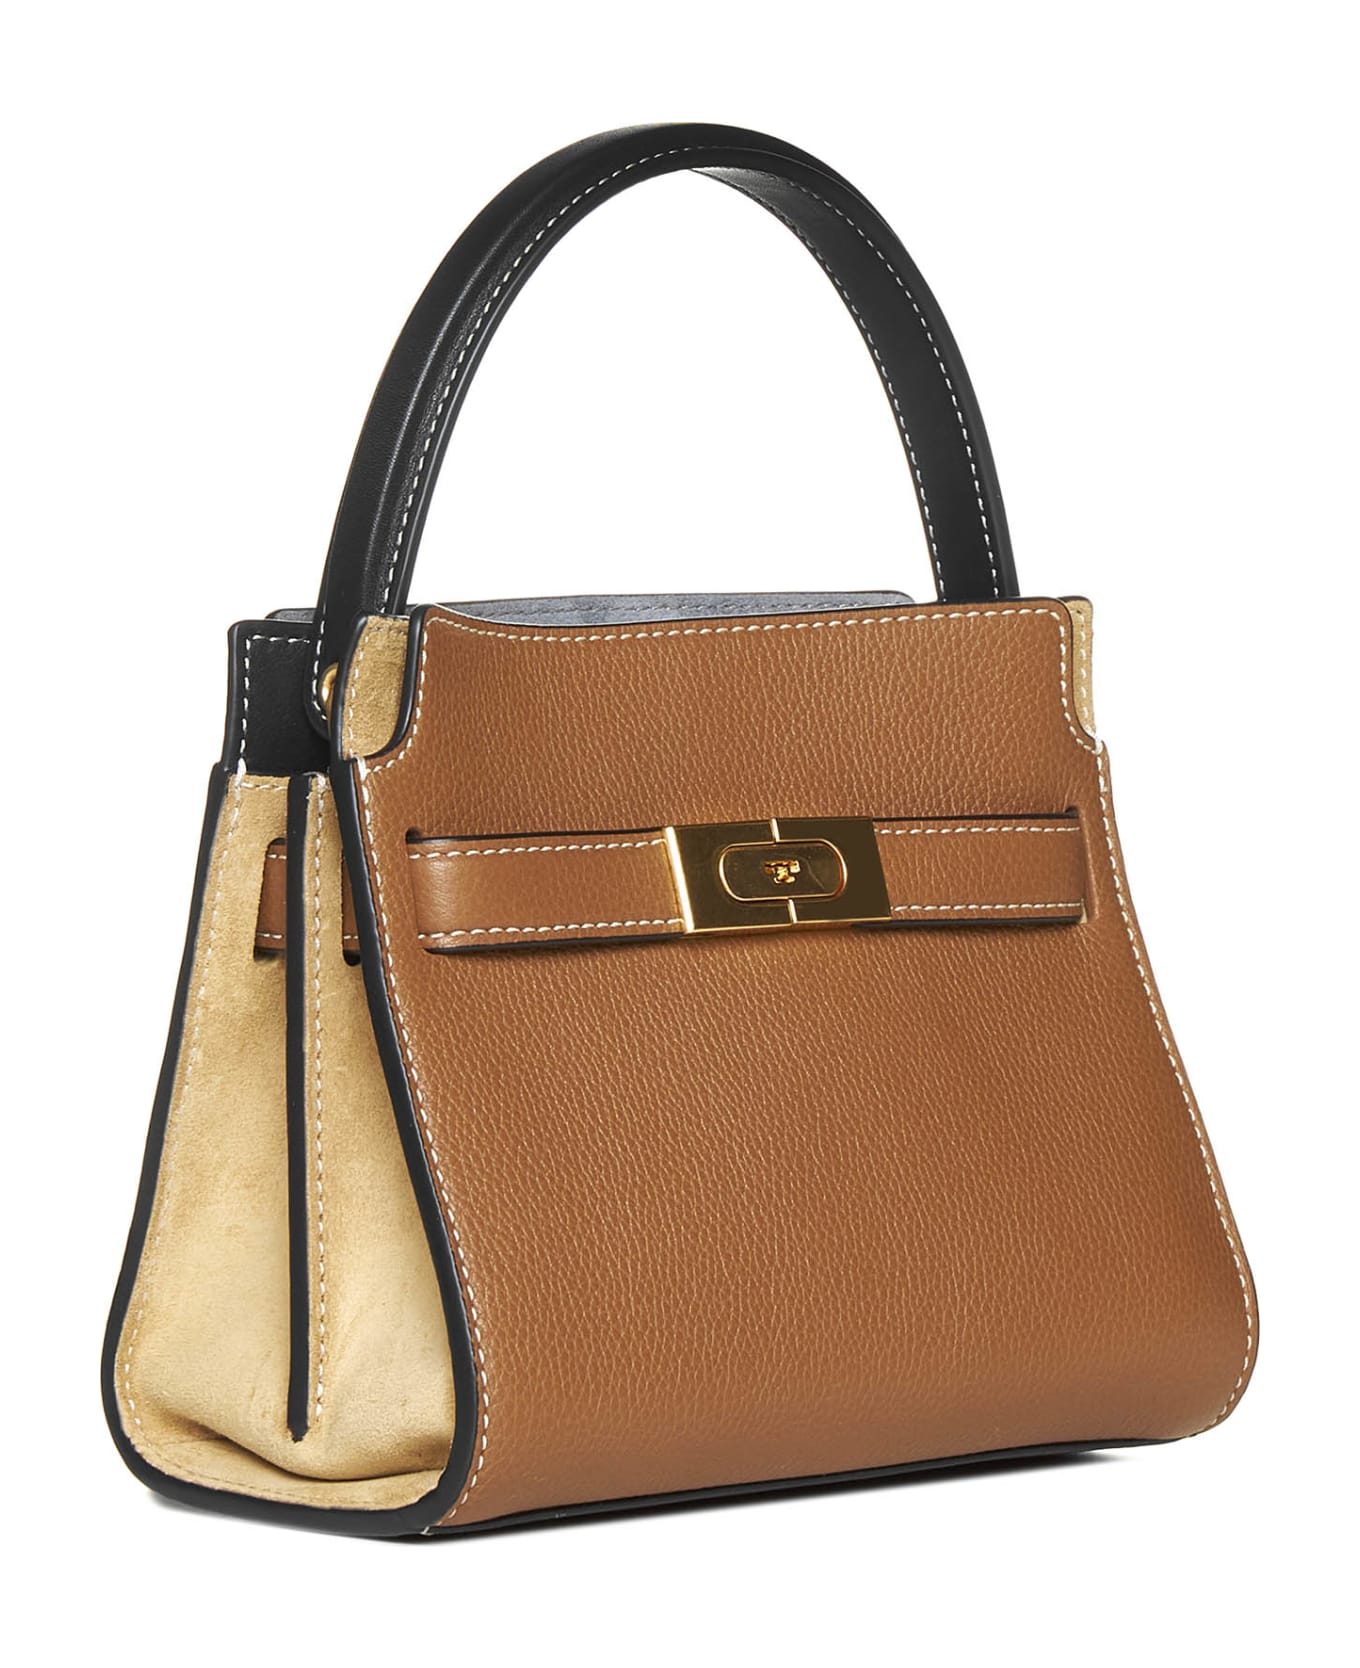 Tory Burch Lee Radziwill Double Bag - Brown